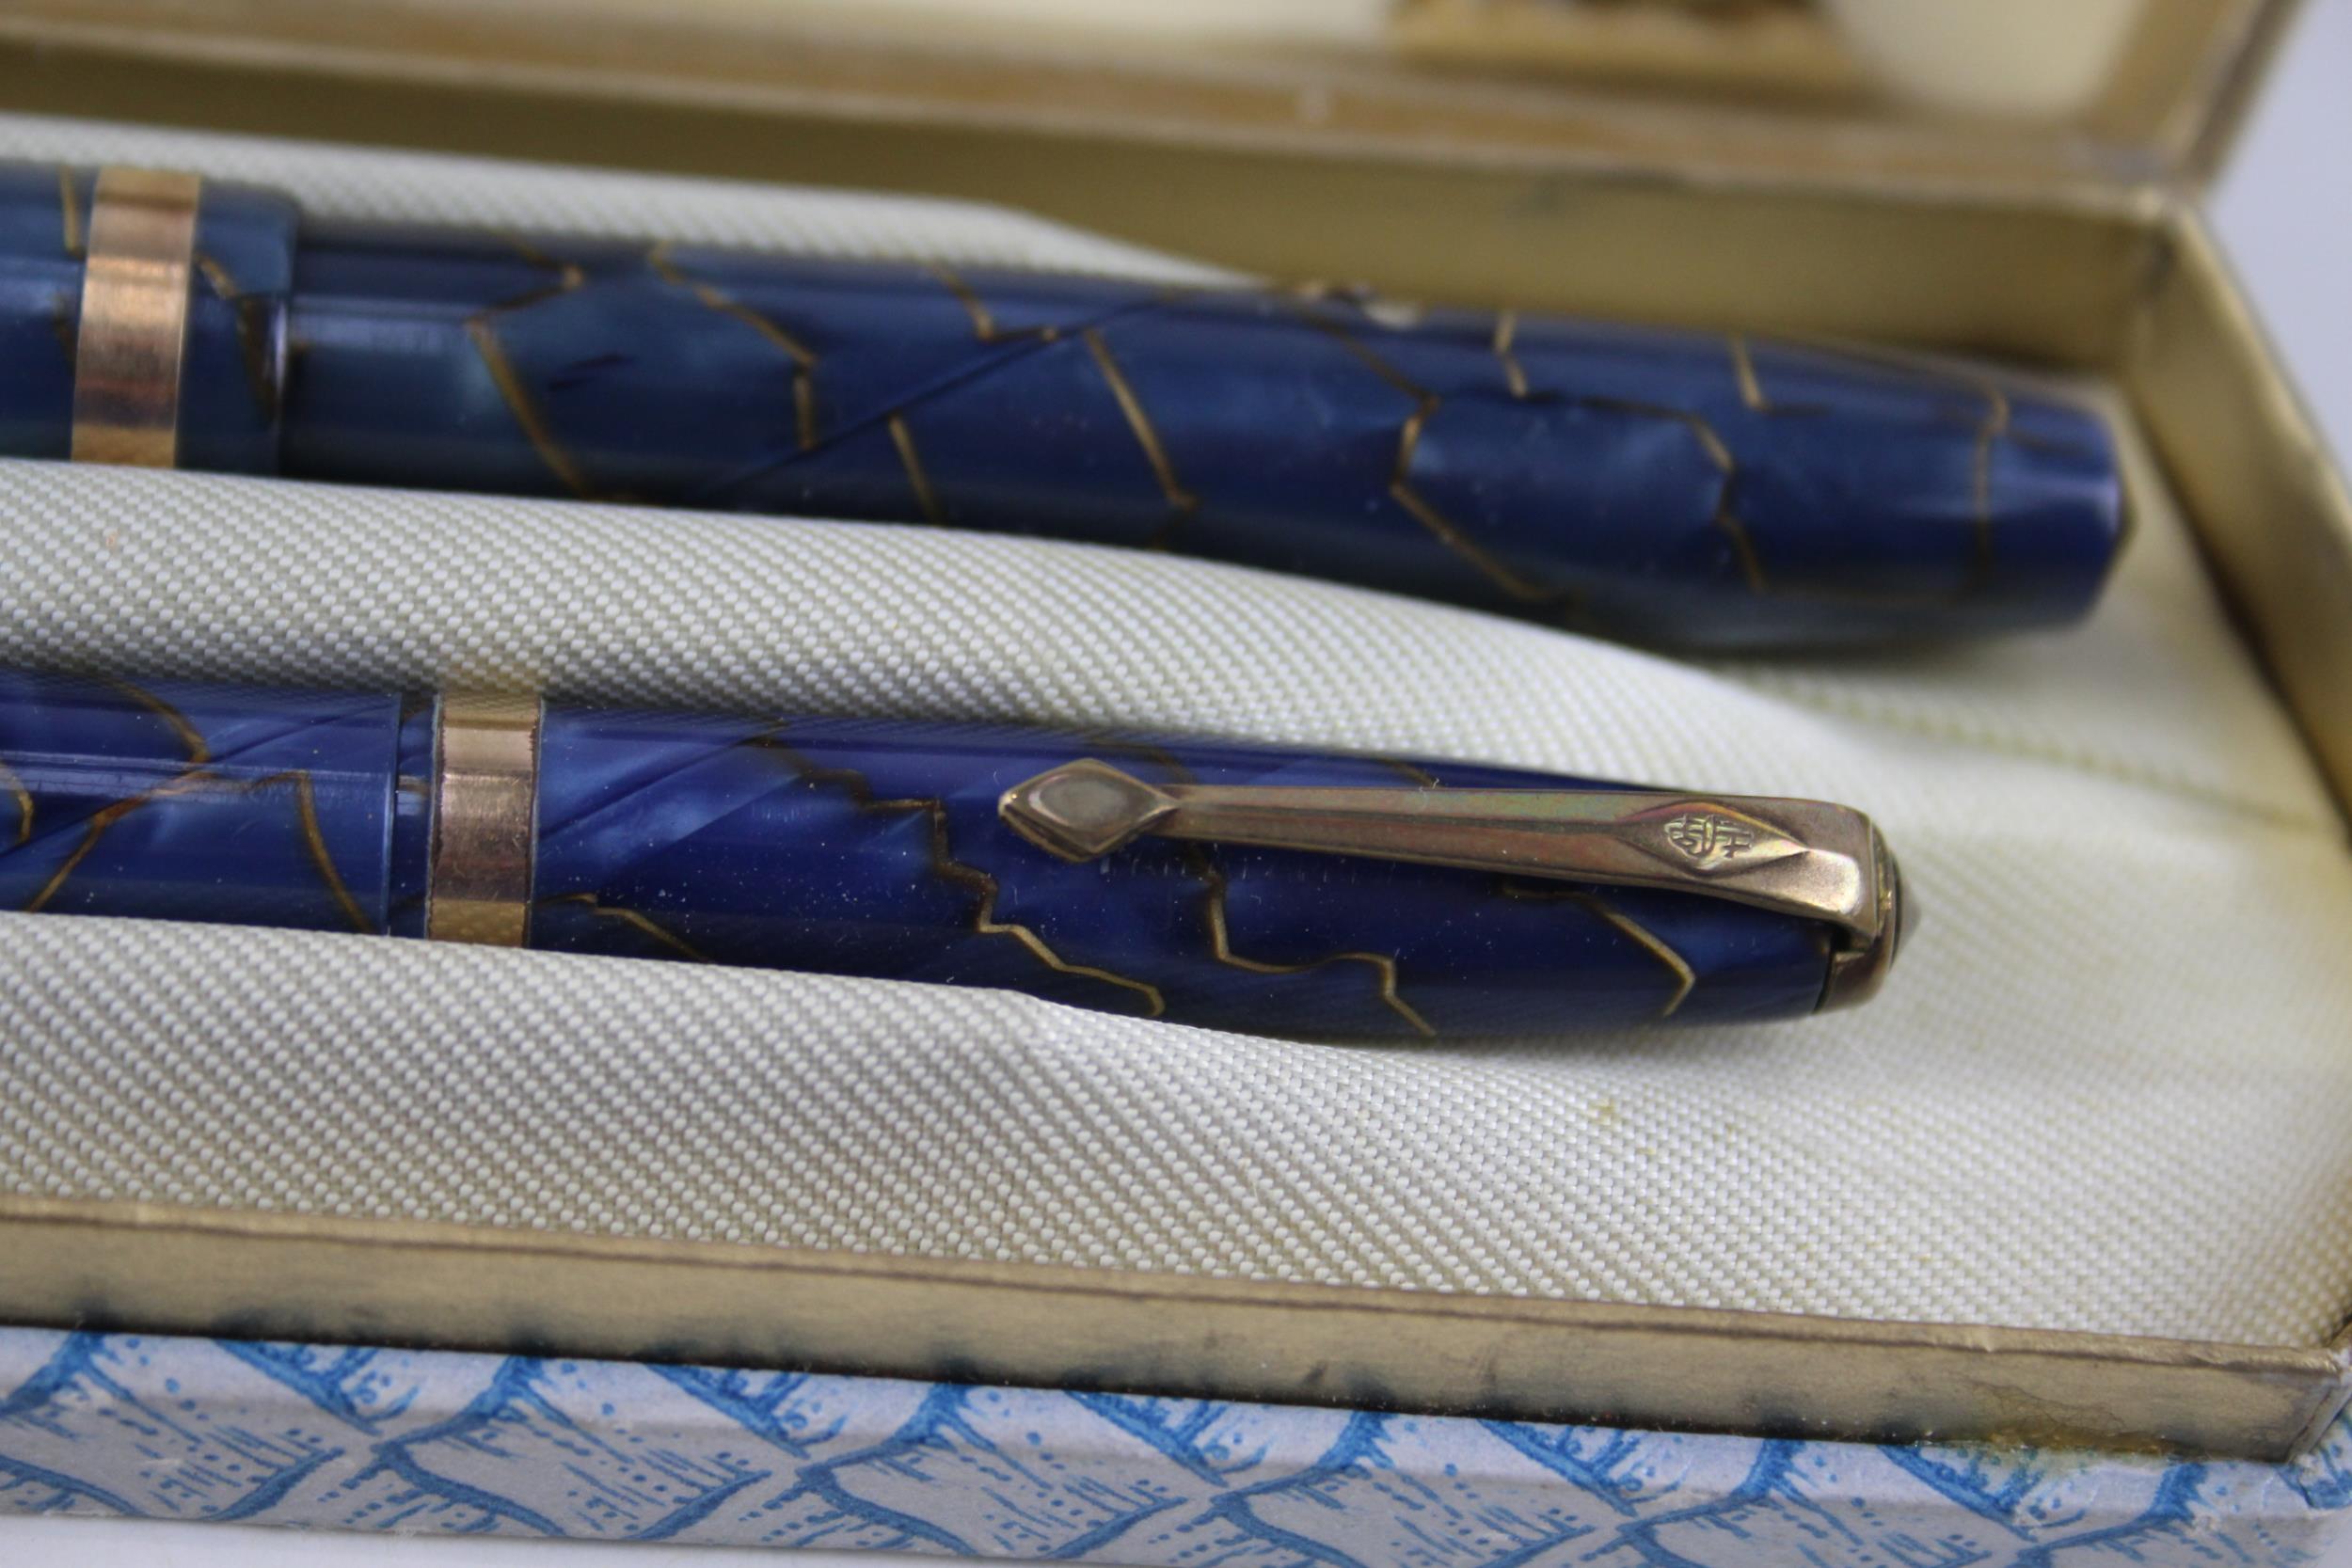 Vintage CONWAY STEWART 84 Navy Casing Fountain Pen w/ 14ct Gold Nib, Pencil Etc - w/ 14ct Gold - Image 5 of 7